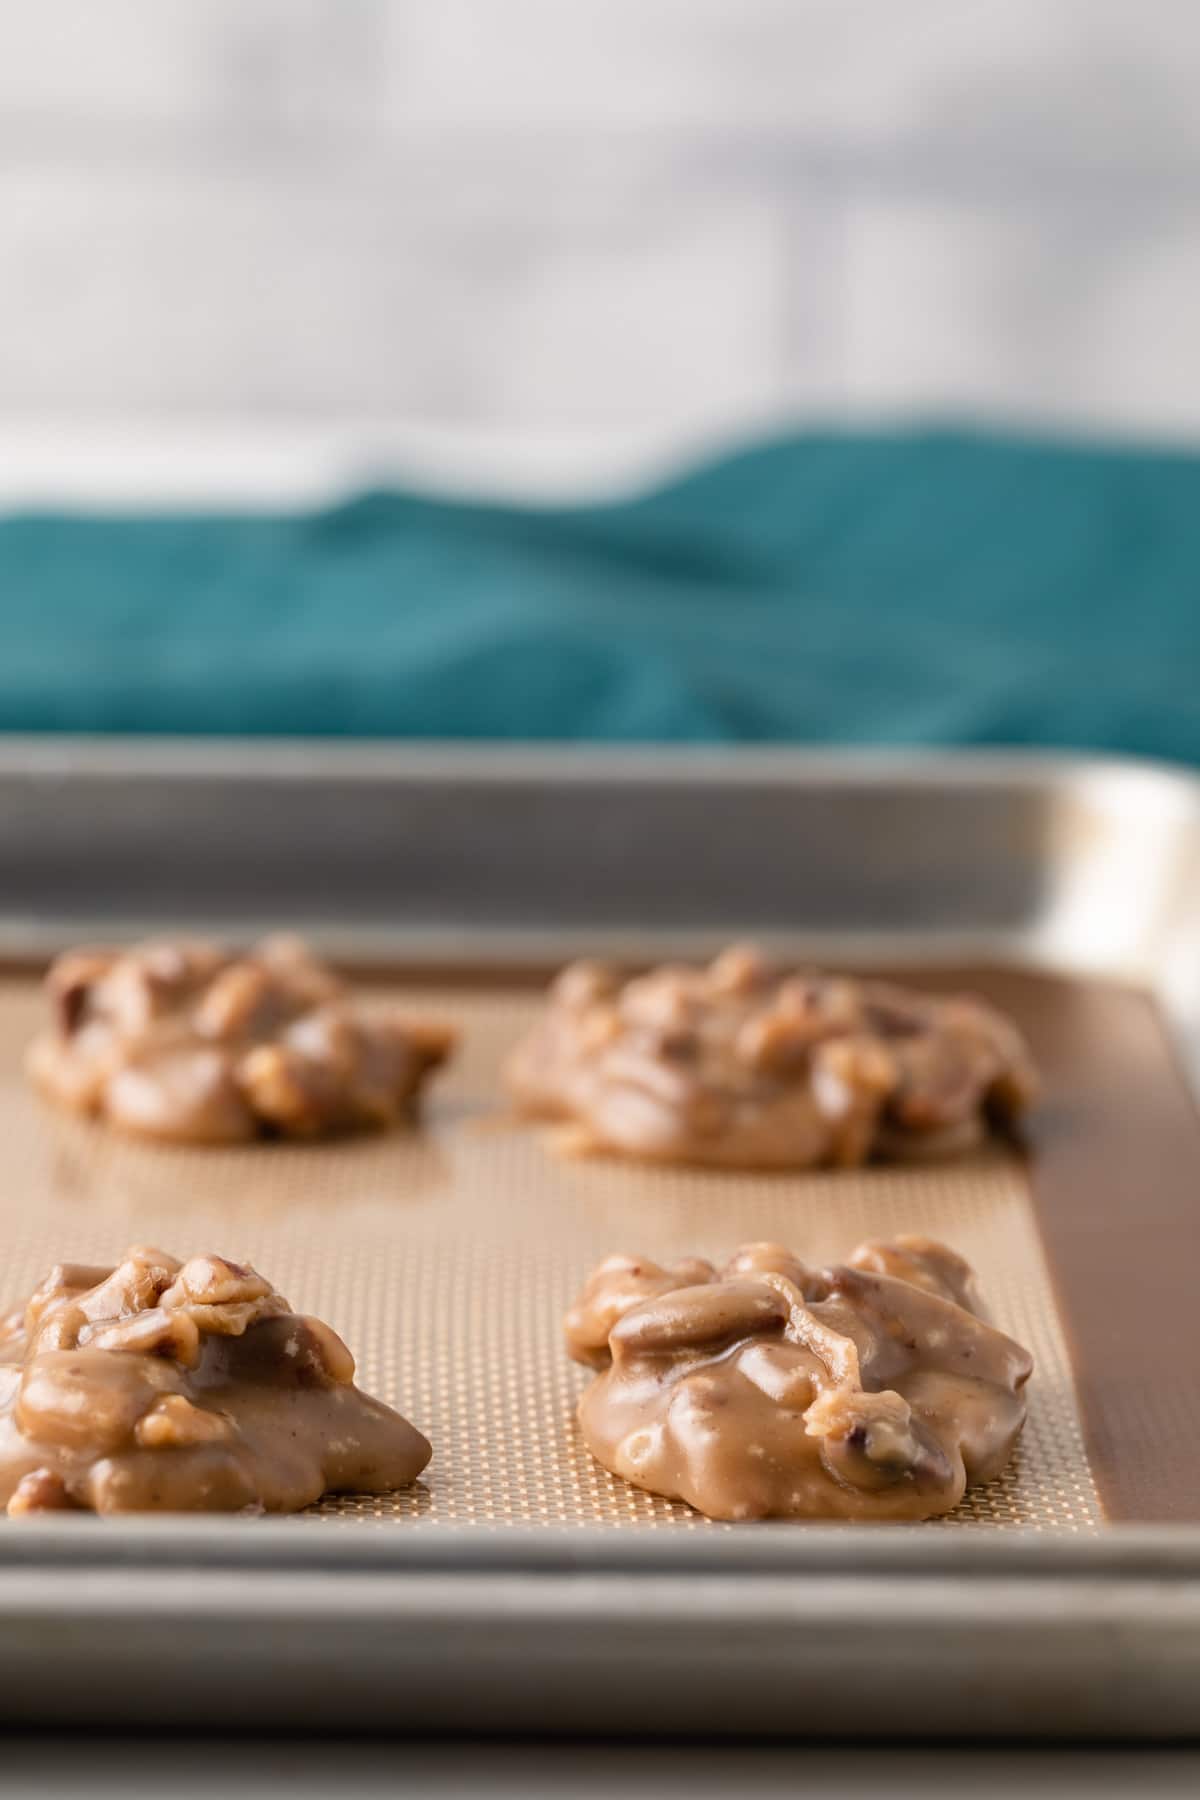 praline pecans on a baking sheet line with silicone mat